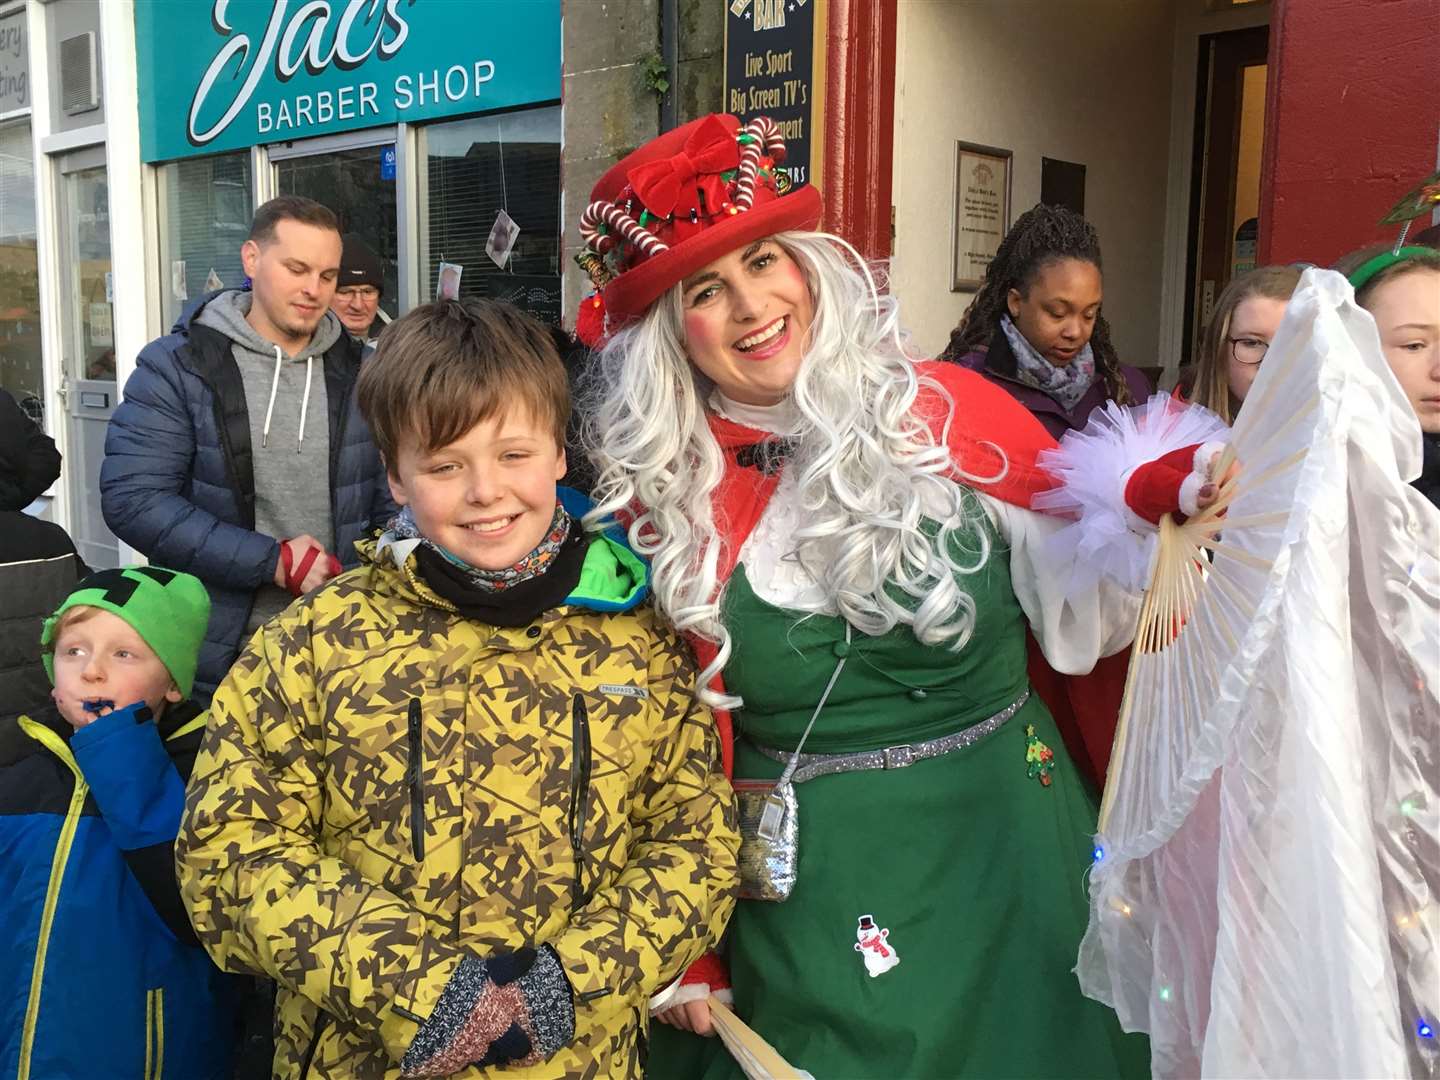 Euan Gray with Mrs Claus.